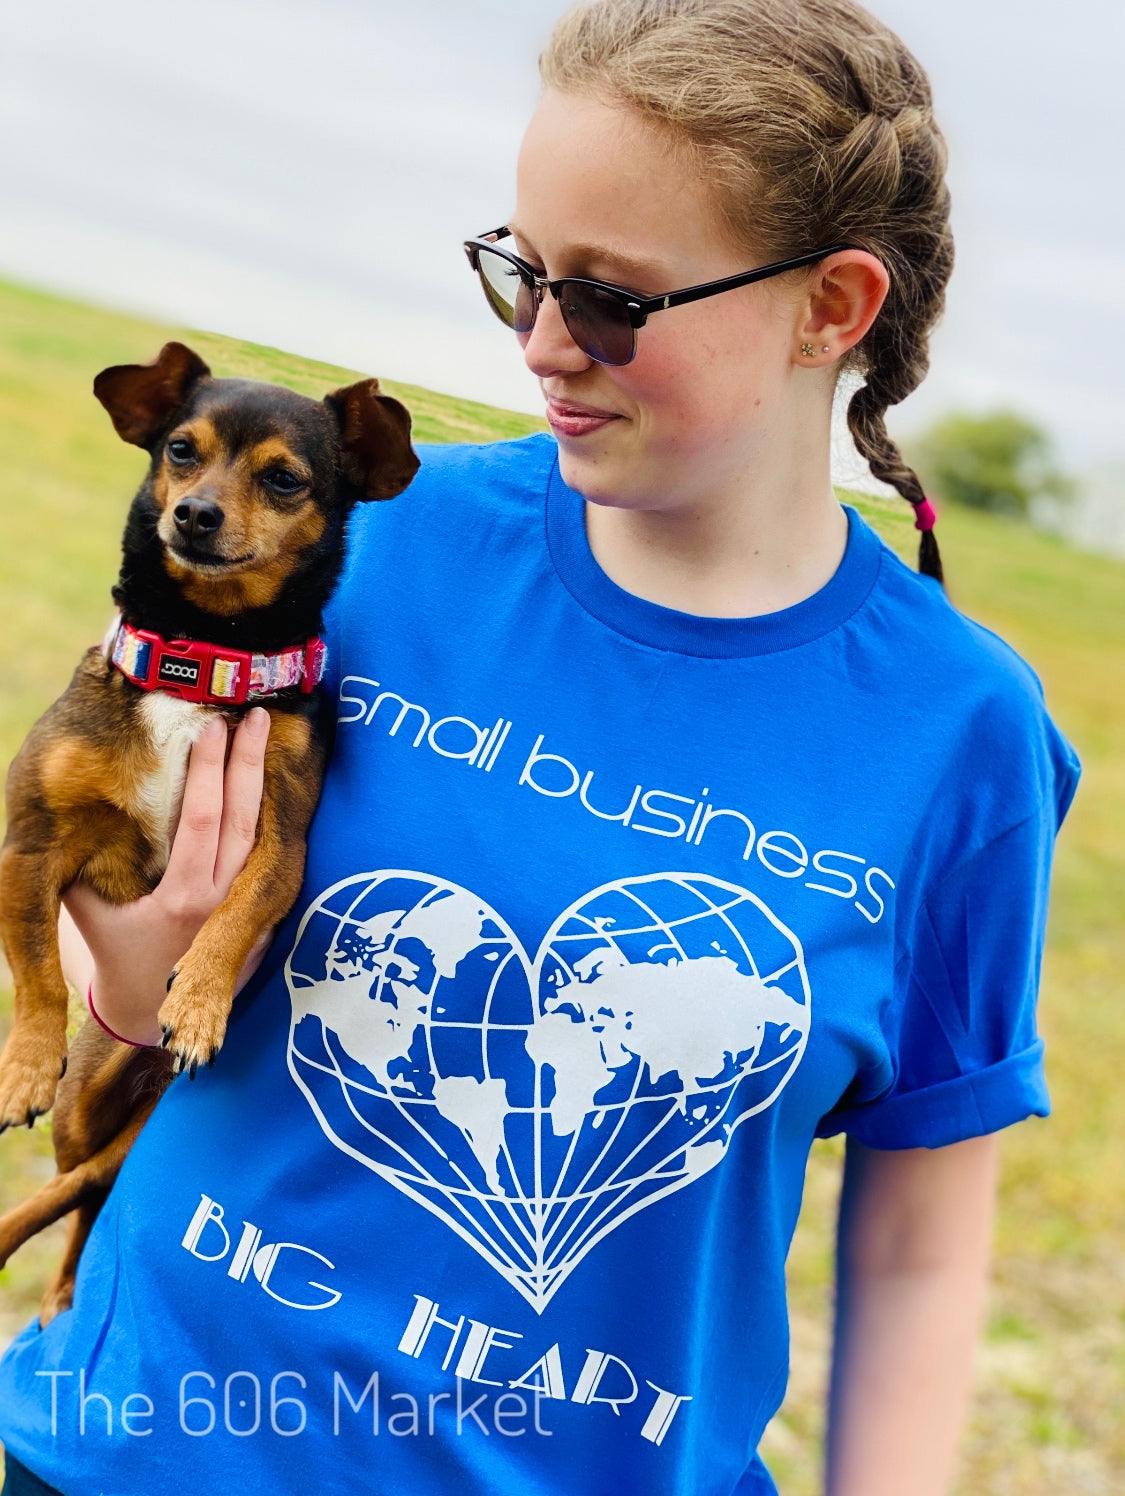 Small Business Big Heart Campaign T-Shirt